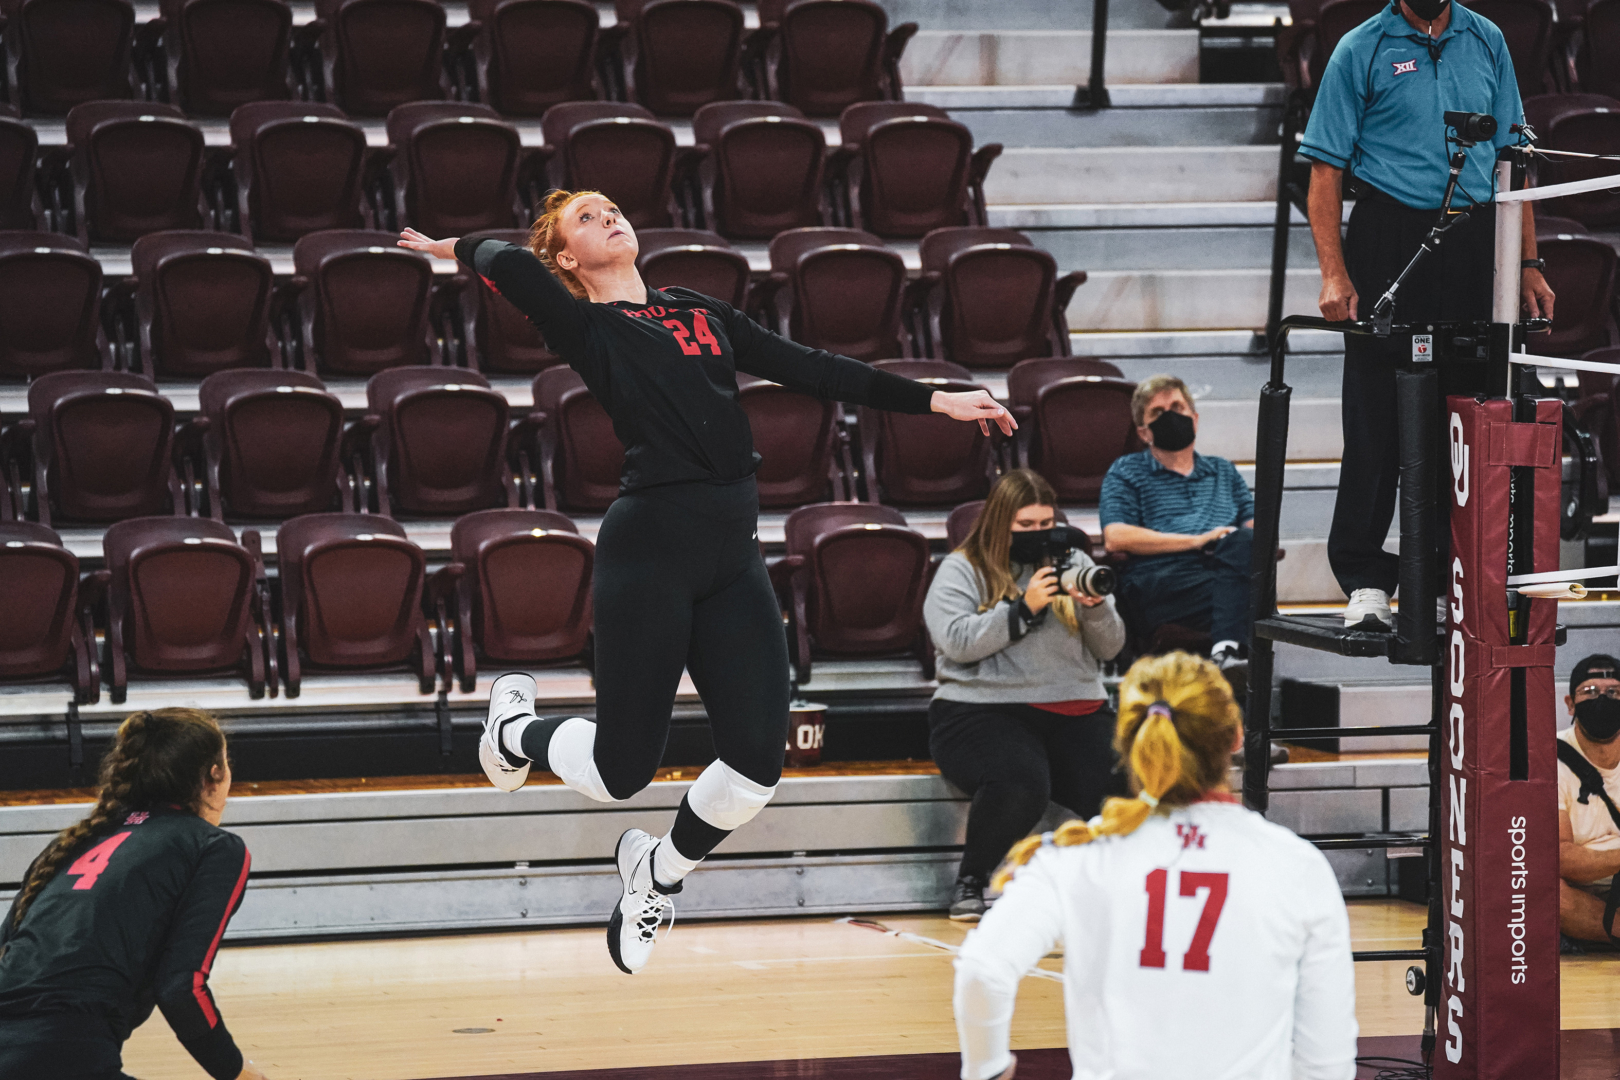 Junior outside hitter Abbie Jackson's 20 kills helped power UH volleyball past UCF on Friday night. | Courtesy of UH athletics